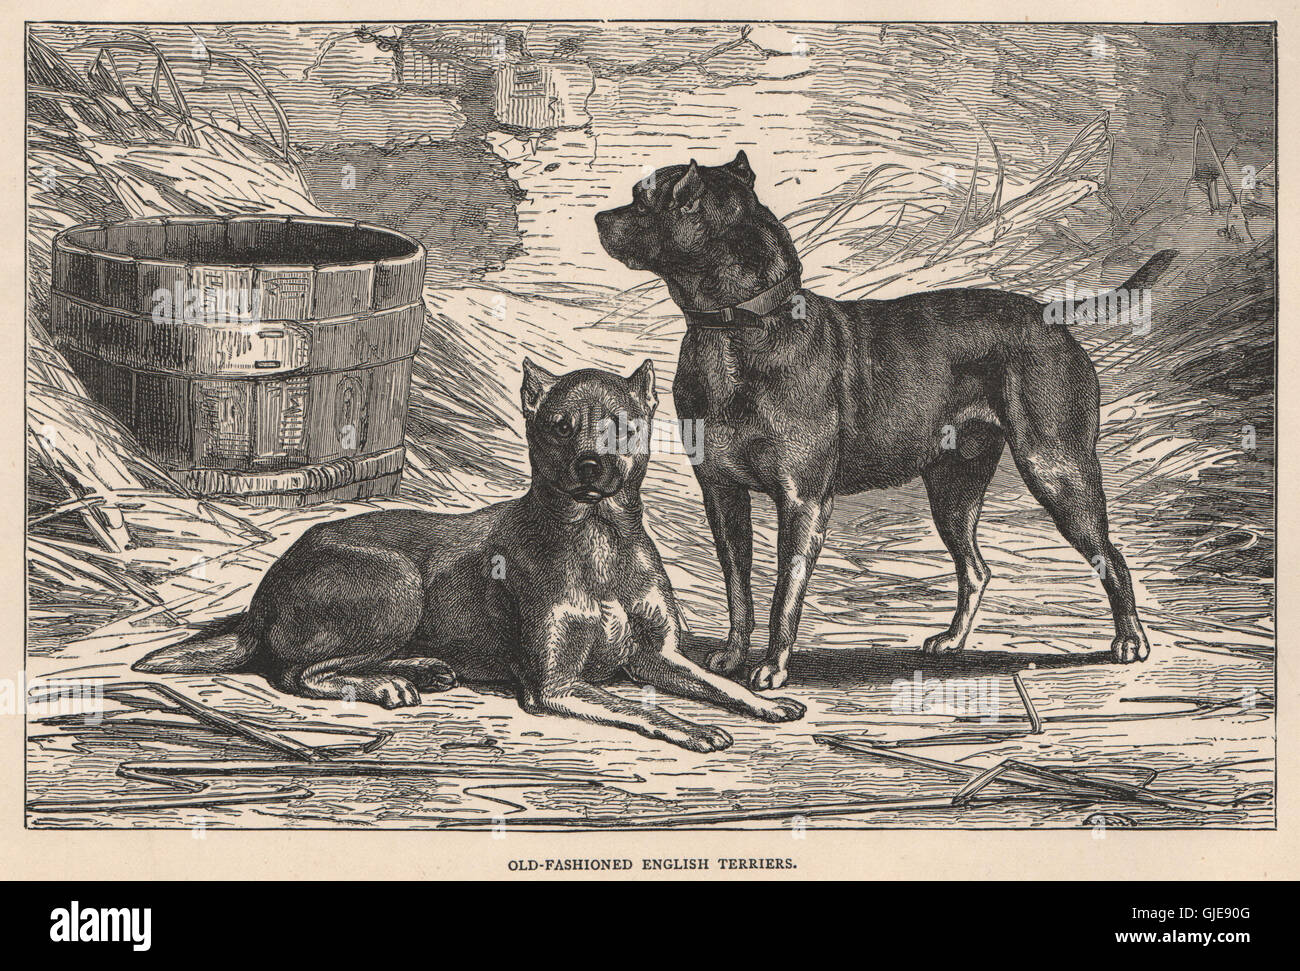 DOGS. Old-Fashioned English Terriers, antique print 1881 Stock Photo